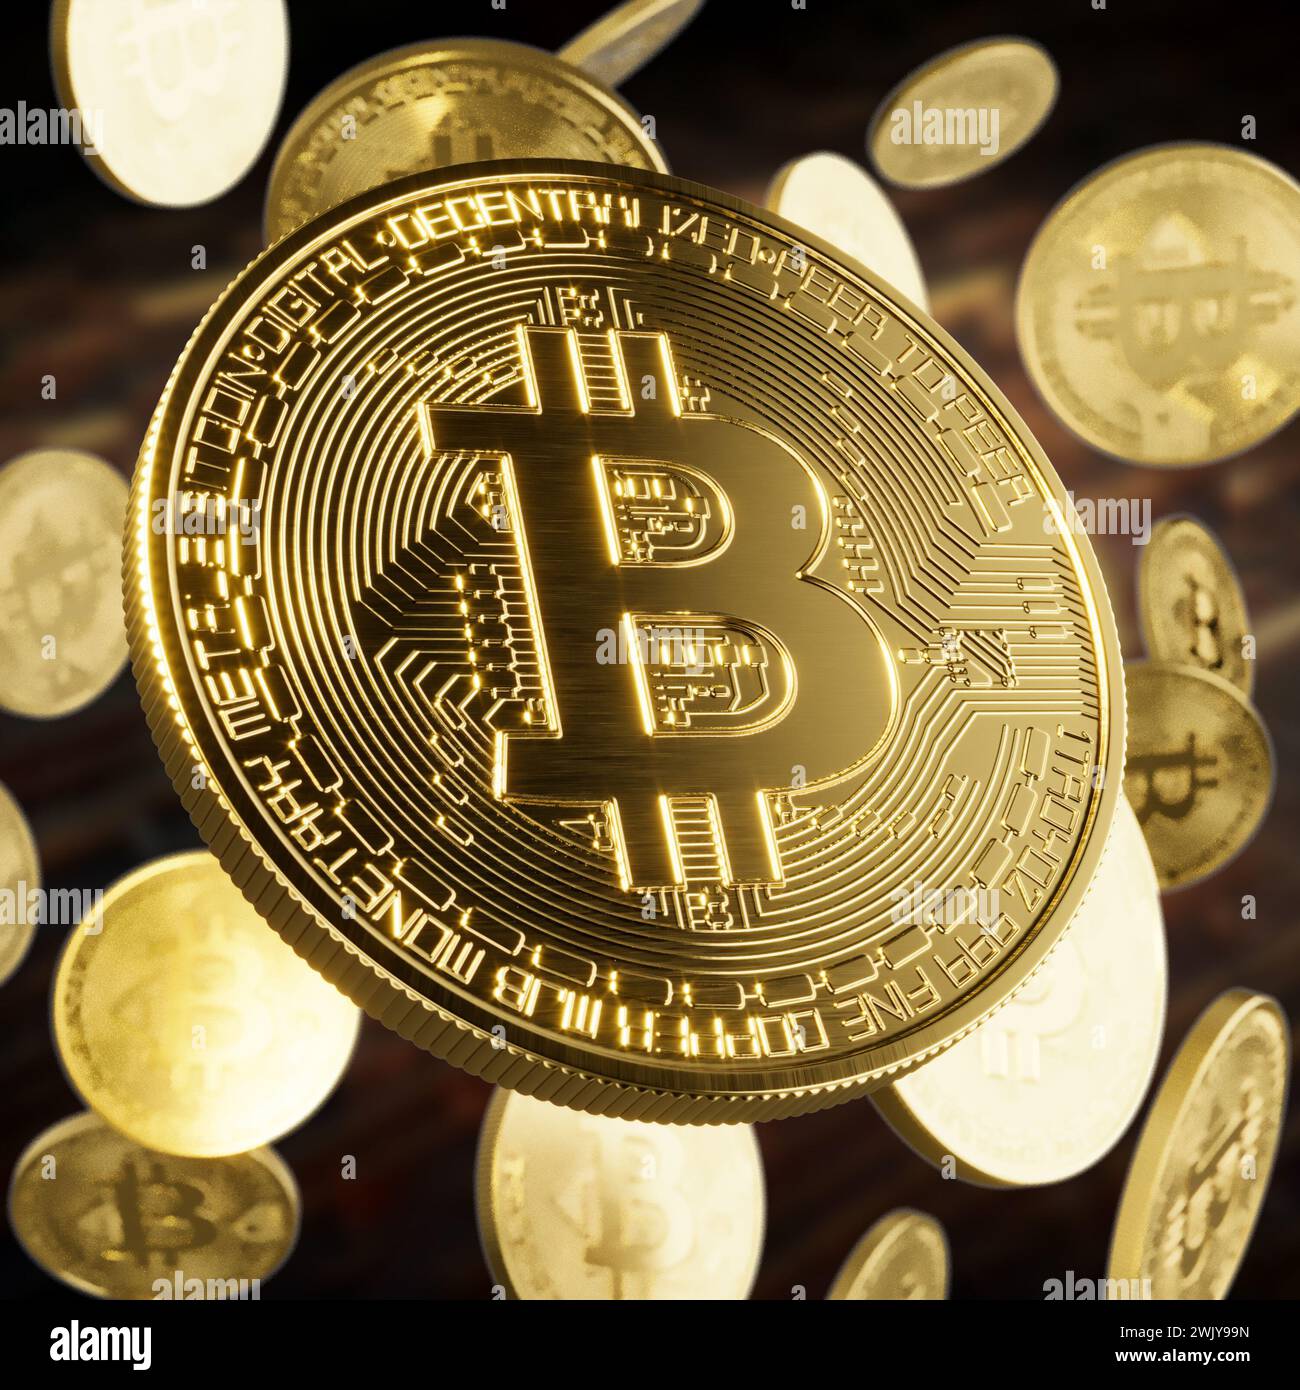 Bitcoin currency Stock Photo